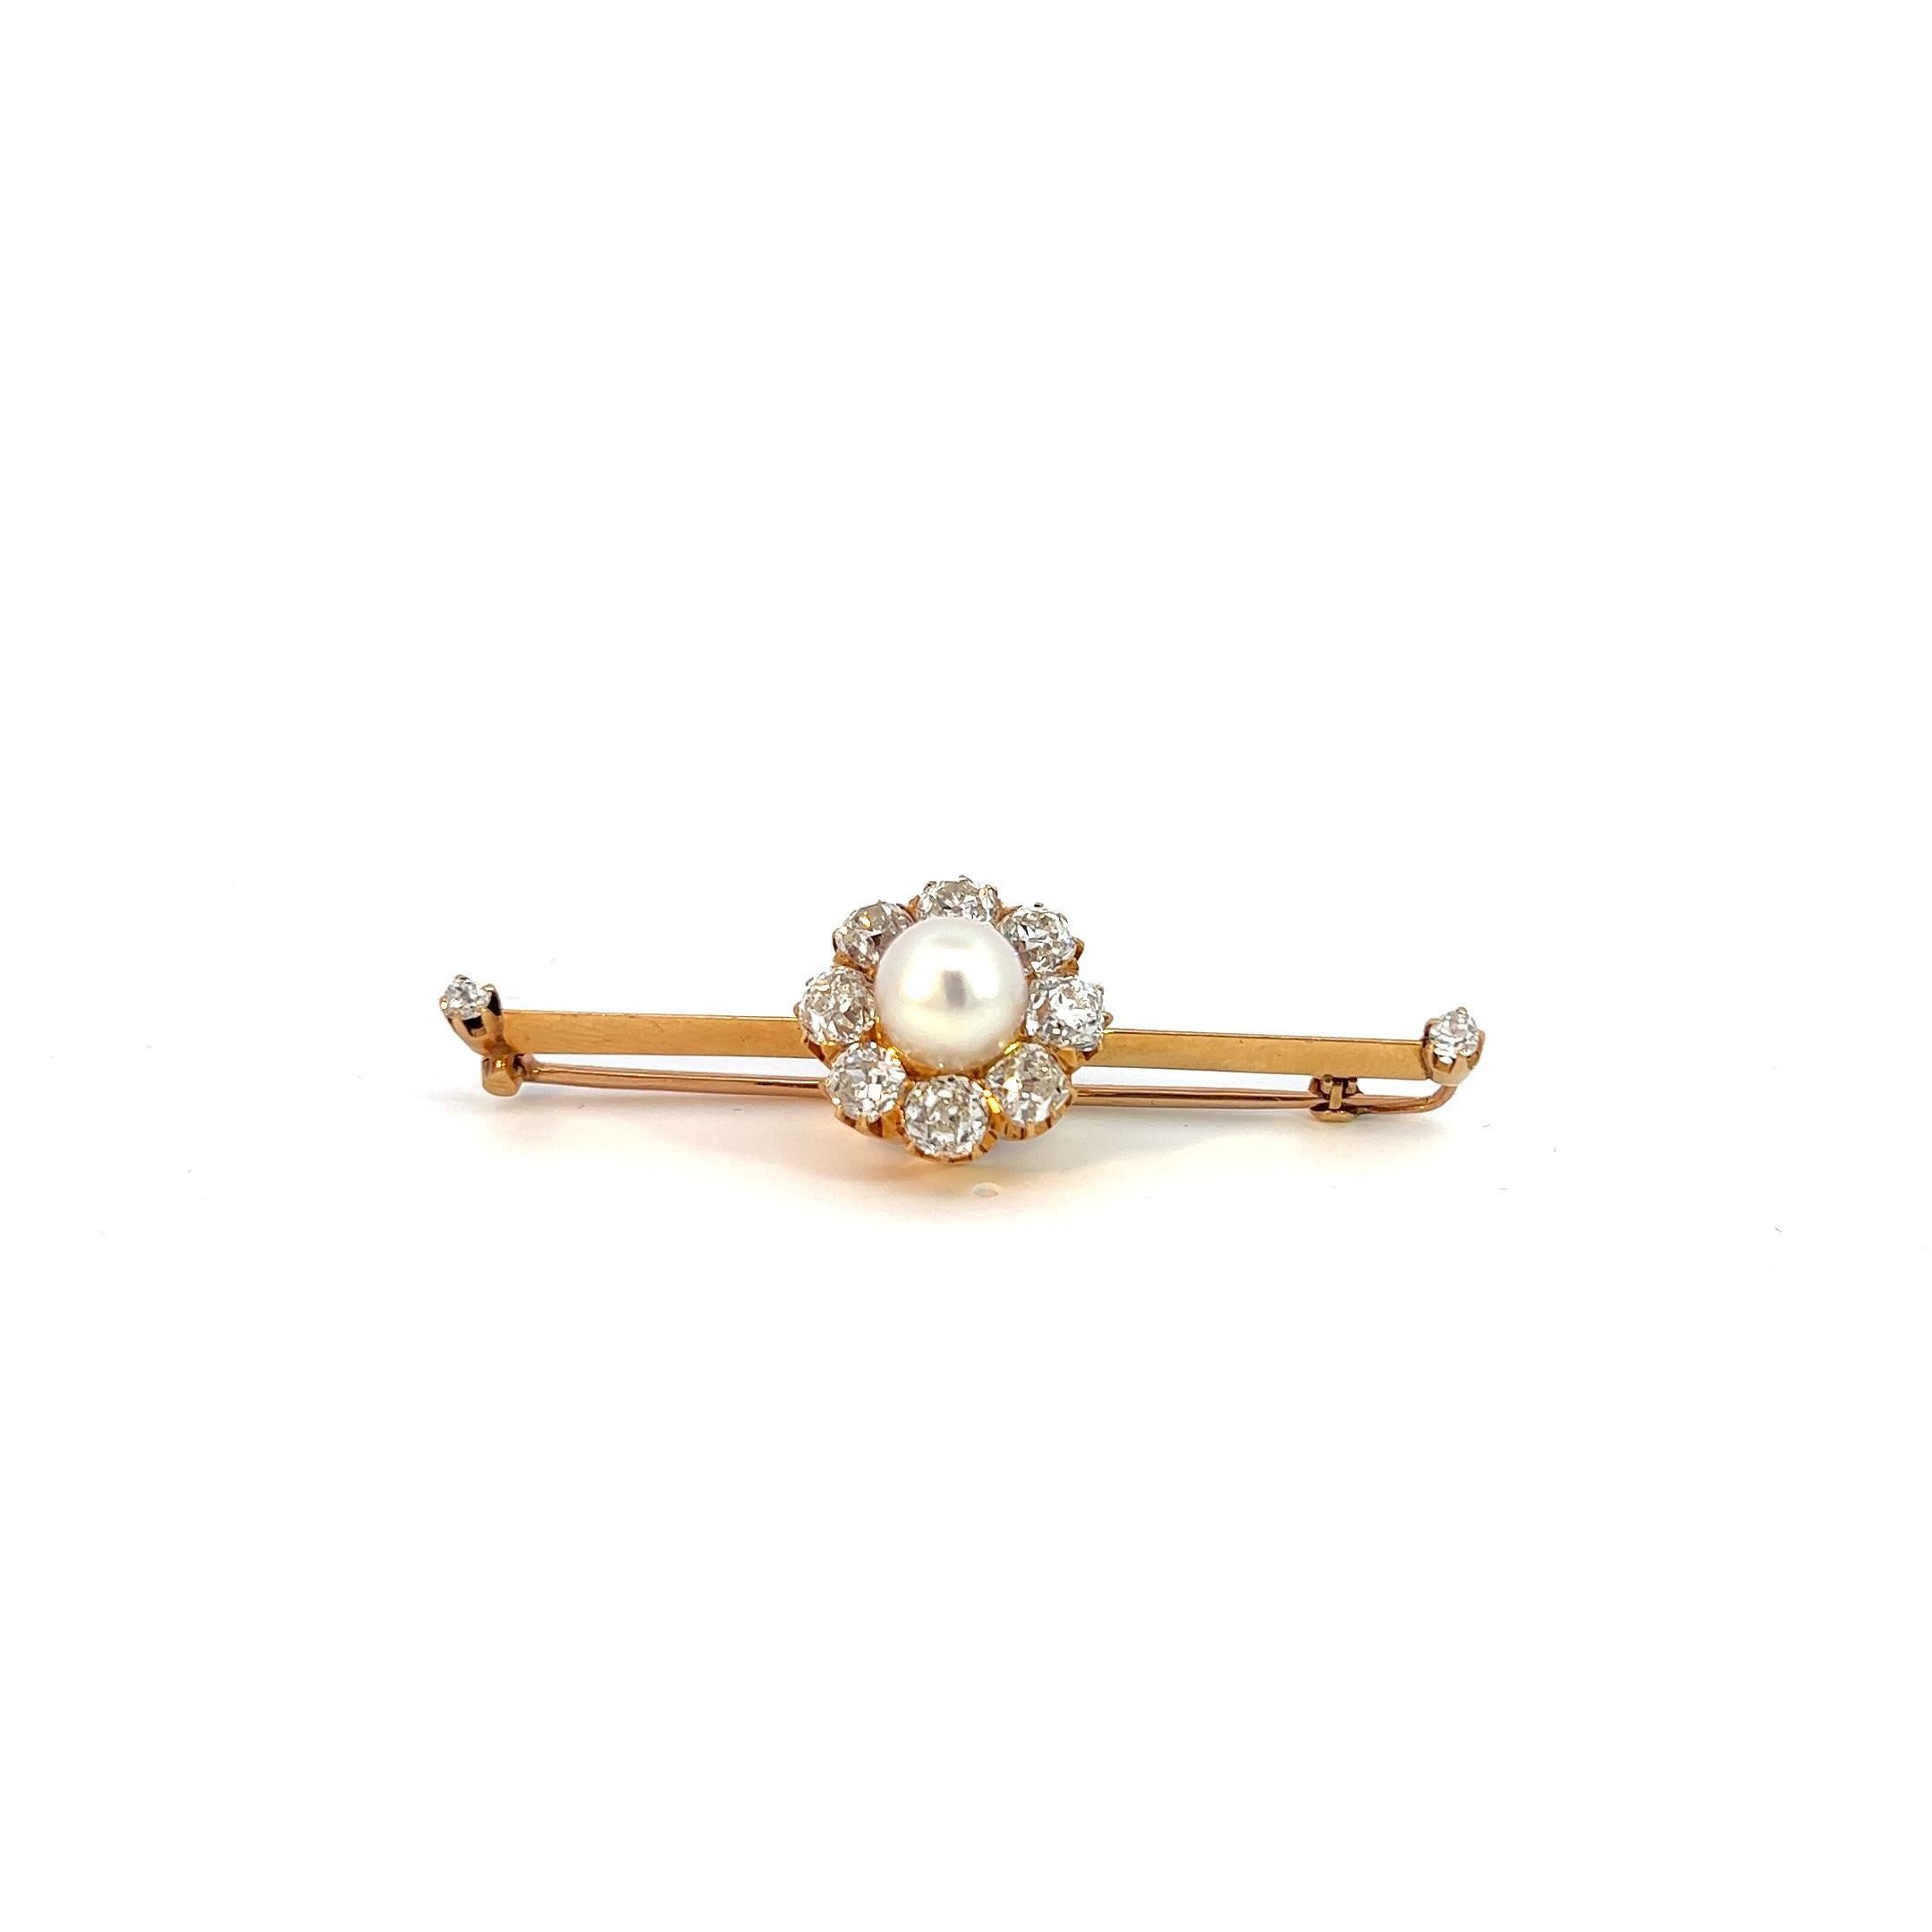 5.00 Carat Natural Pearl and Old European Cut Diamond Tie Pin 18K Yellow Gold In Good Condition For Sale In New York, NY